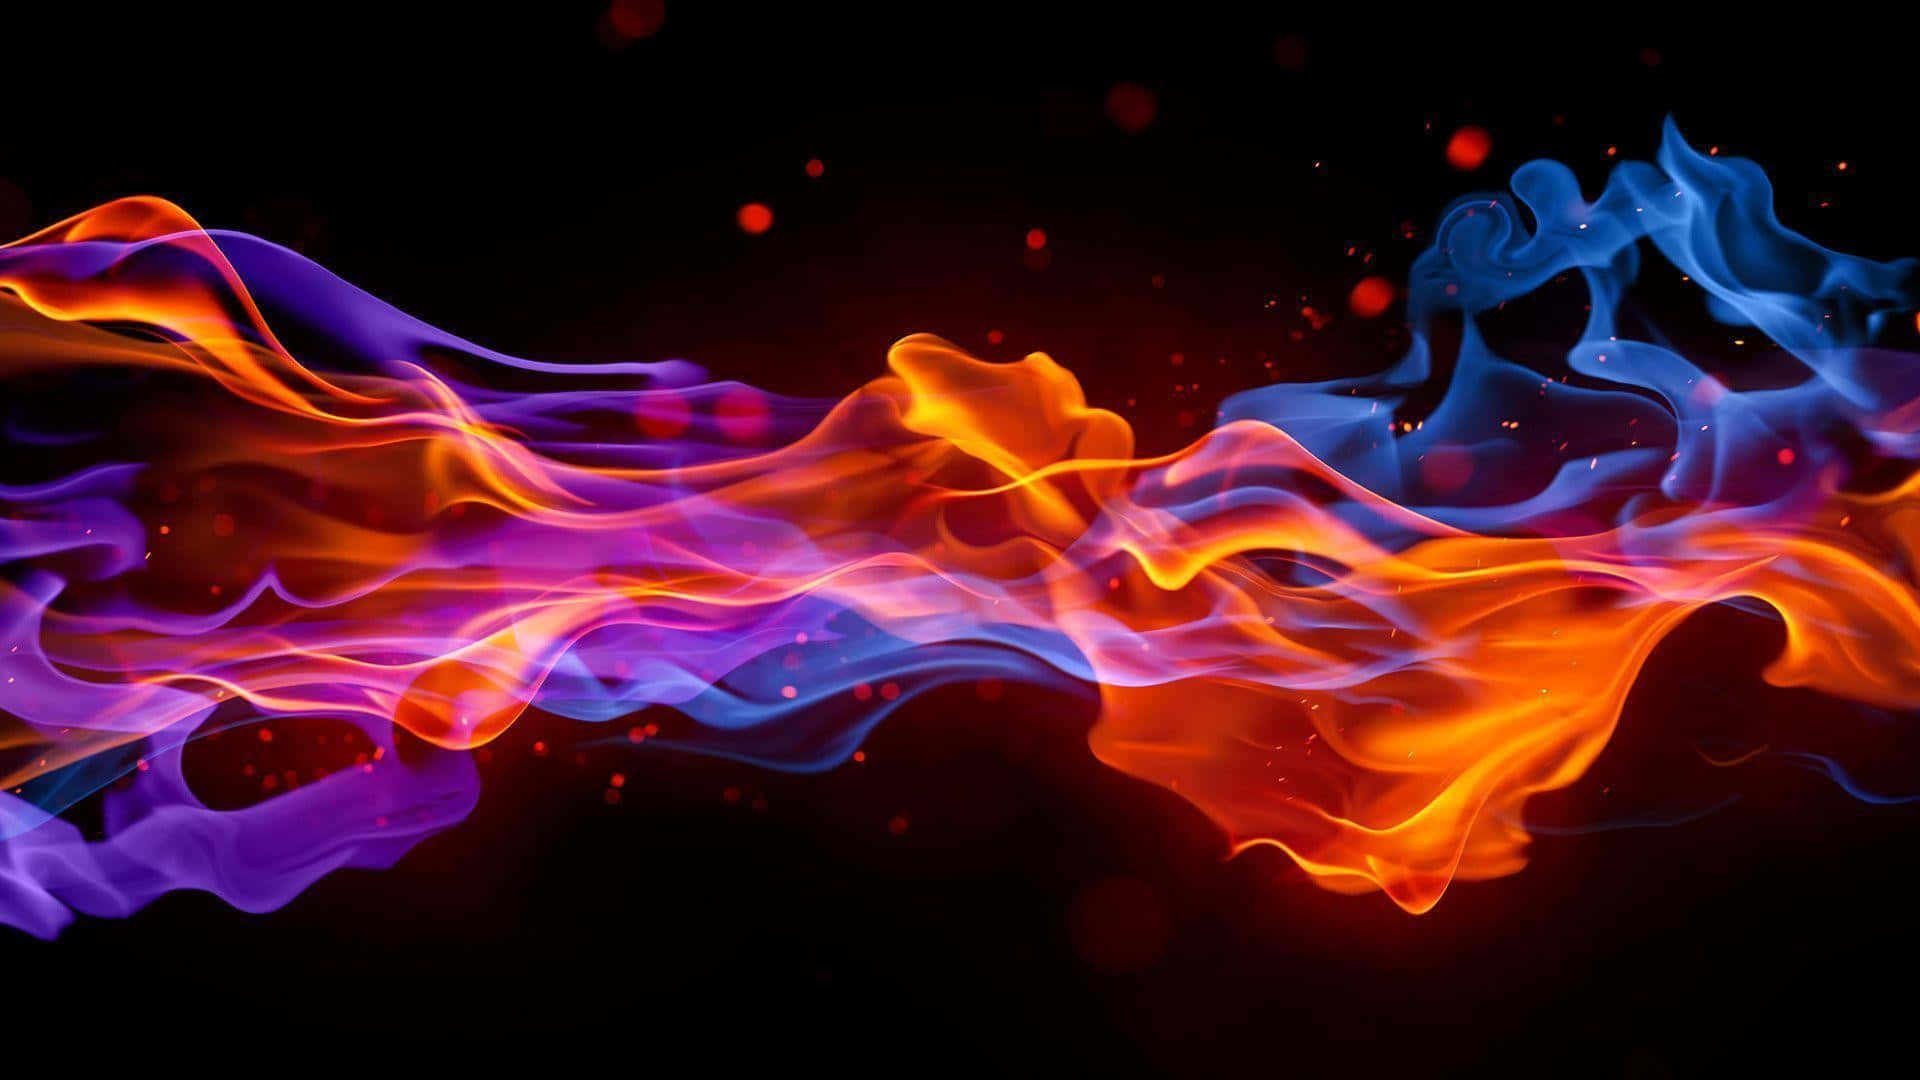 "A Stunning Display of Red and Blue Fire" Wallpaper